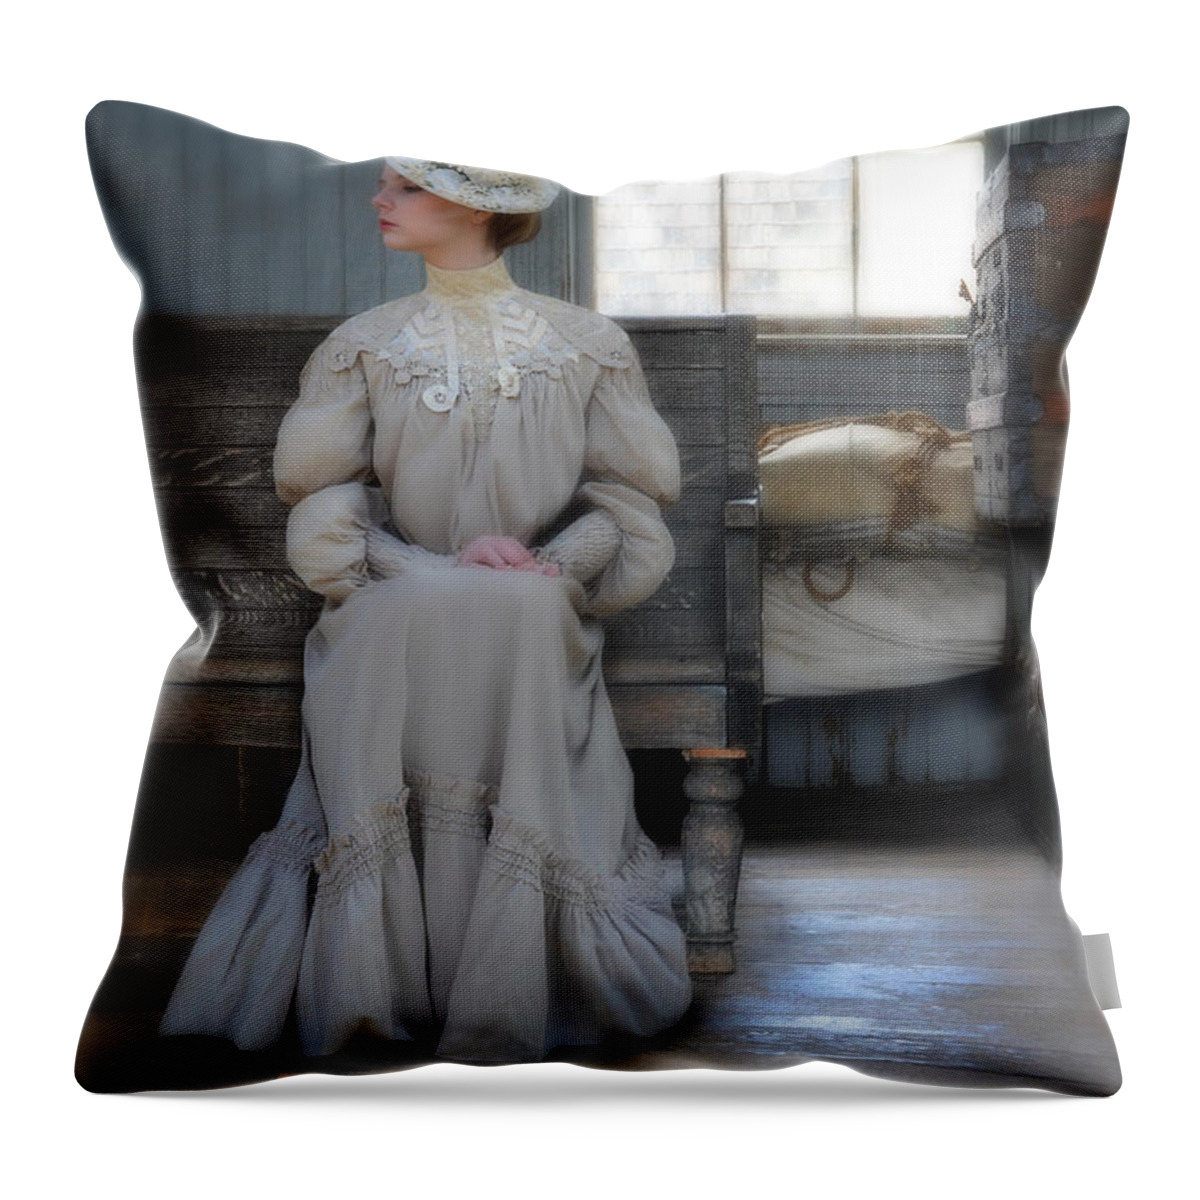 Young Throw Pillow featuring the photograph Lady Waiting in Train Depot by Jill Battaglia